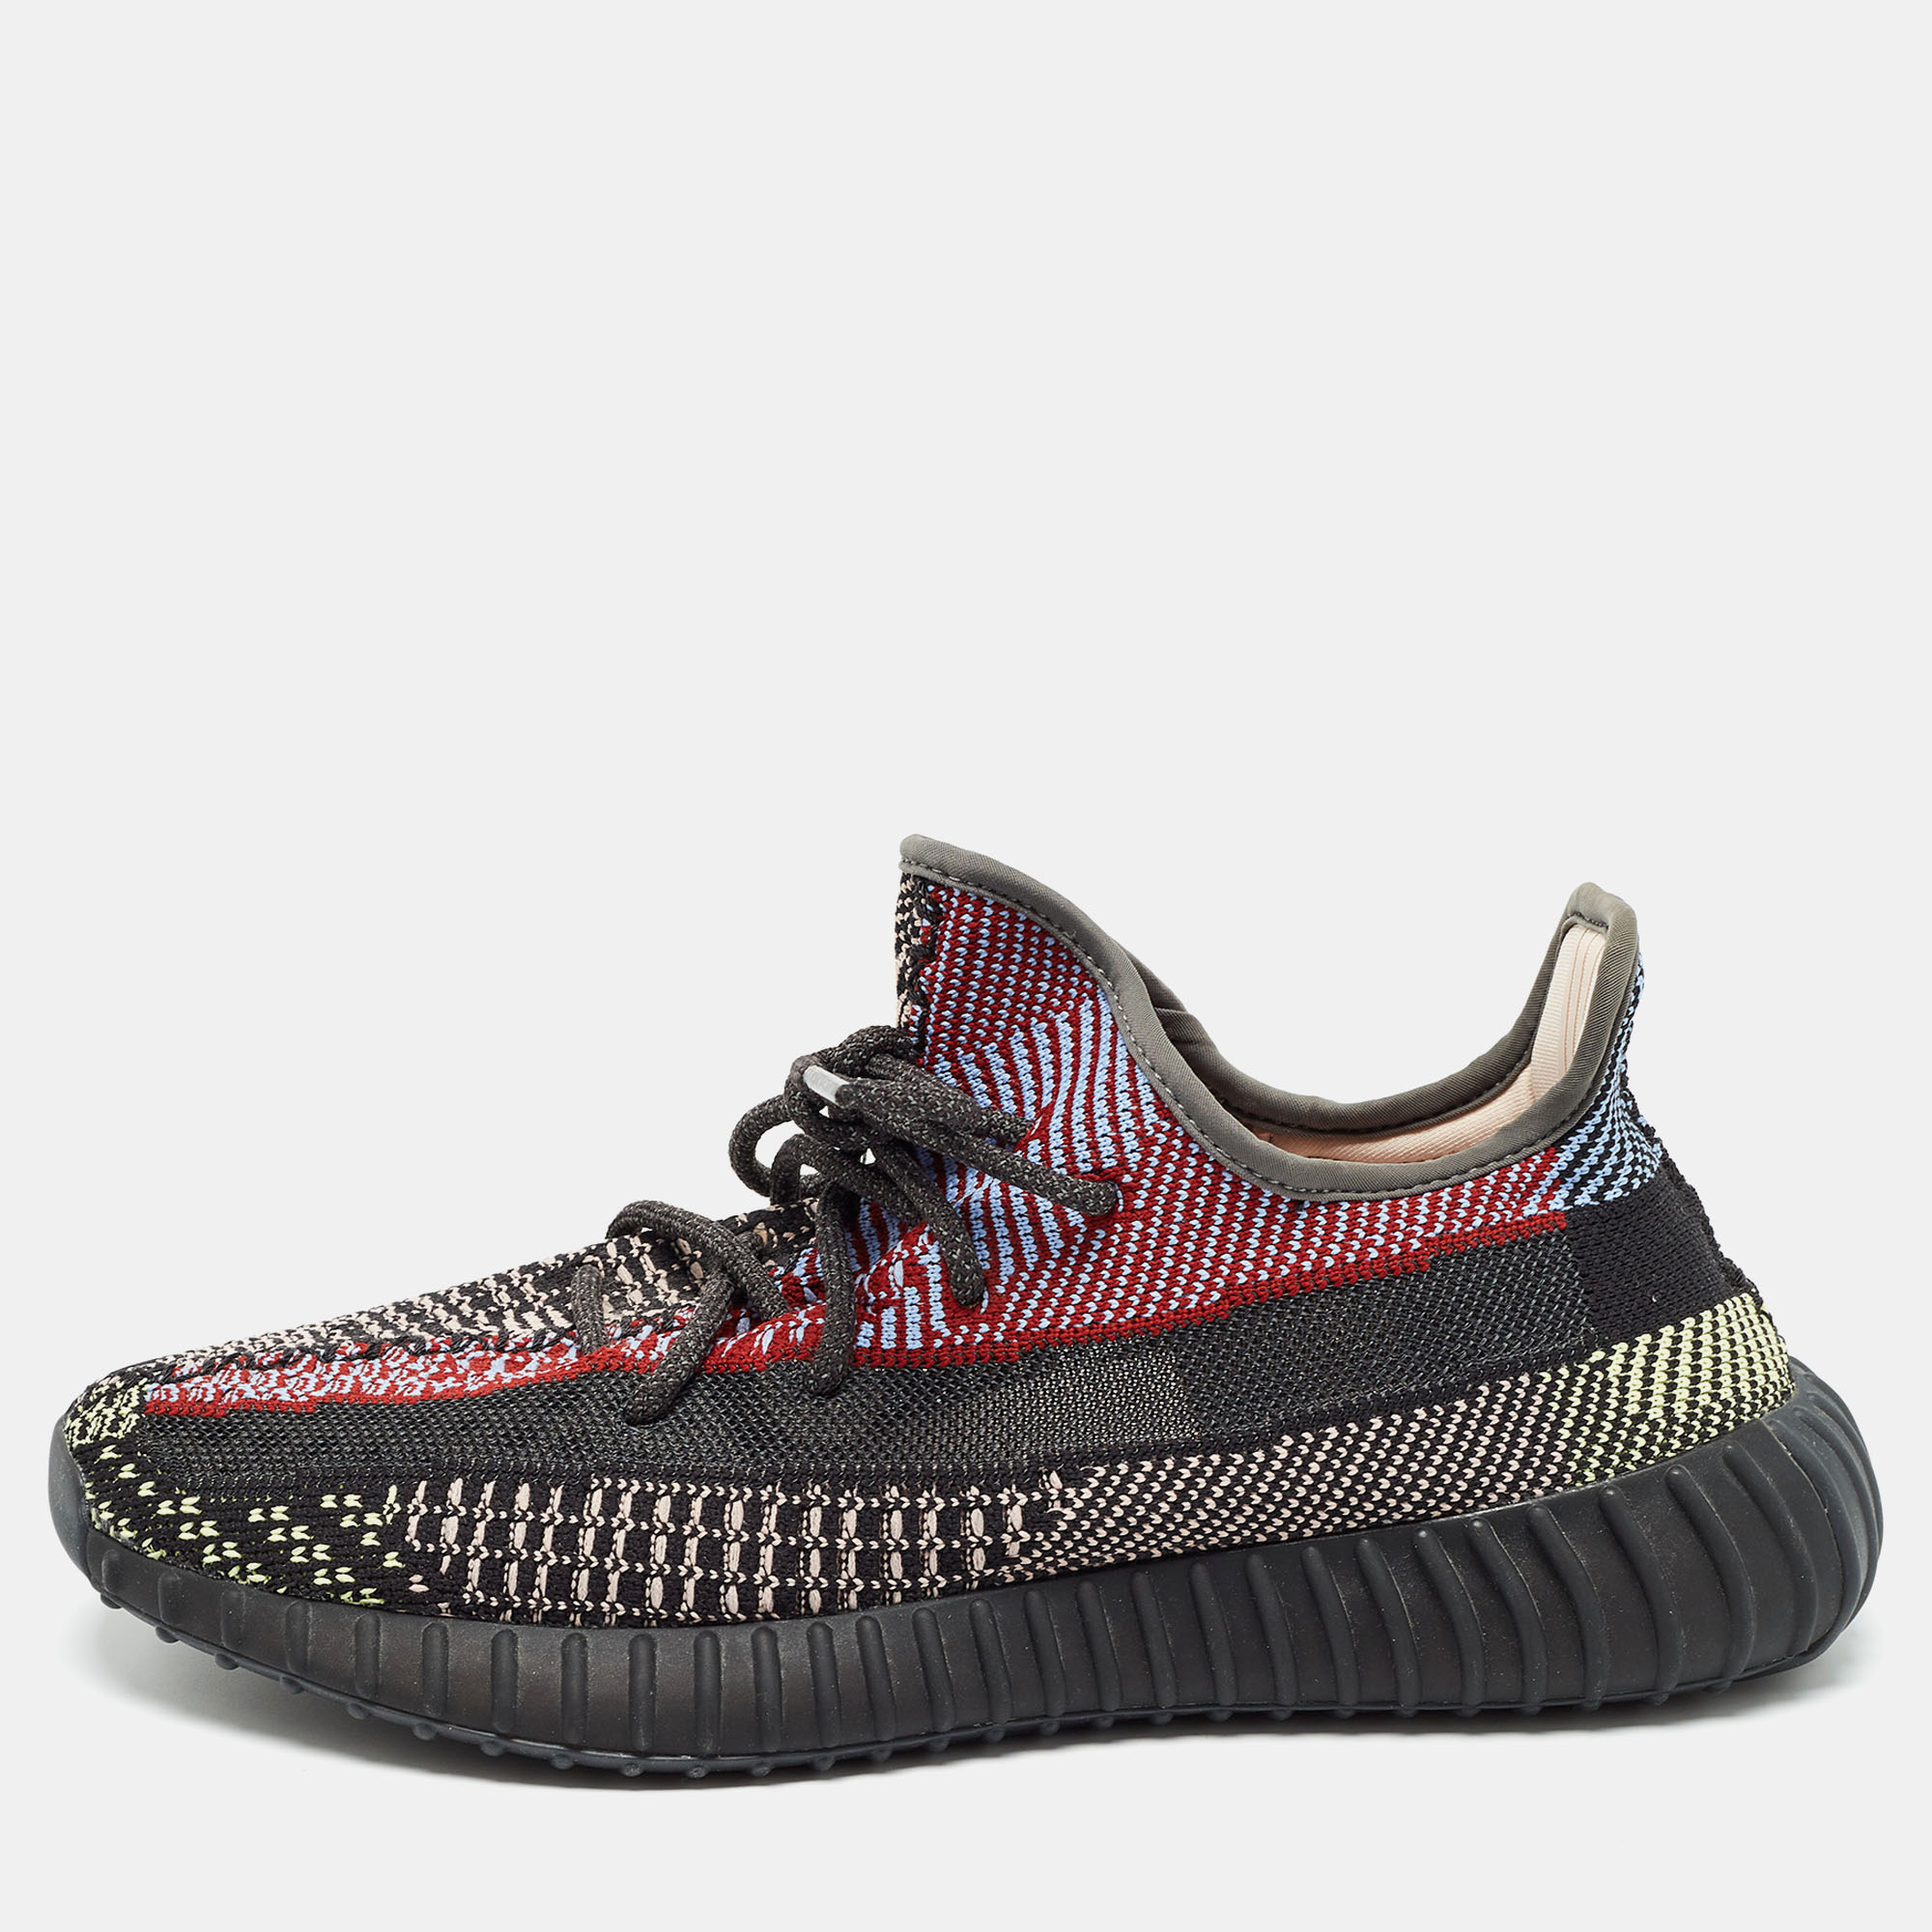 

Yeezy x Adidas Multicolor Knit Fabric Boost 350 V2 Yecheil (Non-Reflective) Sneakers Size